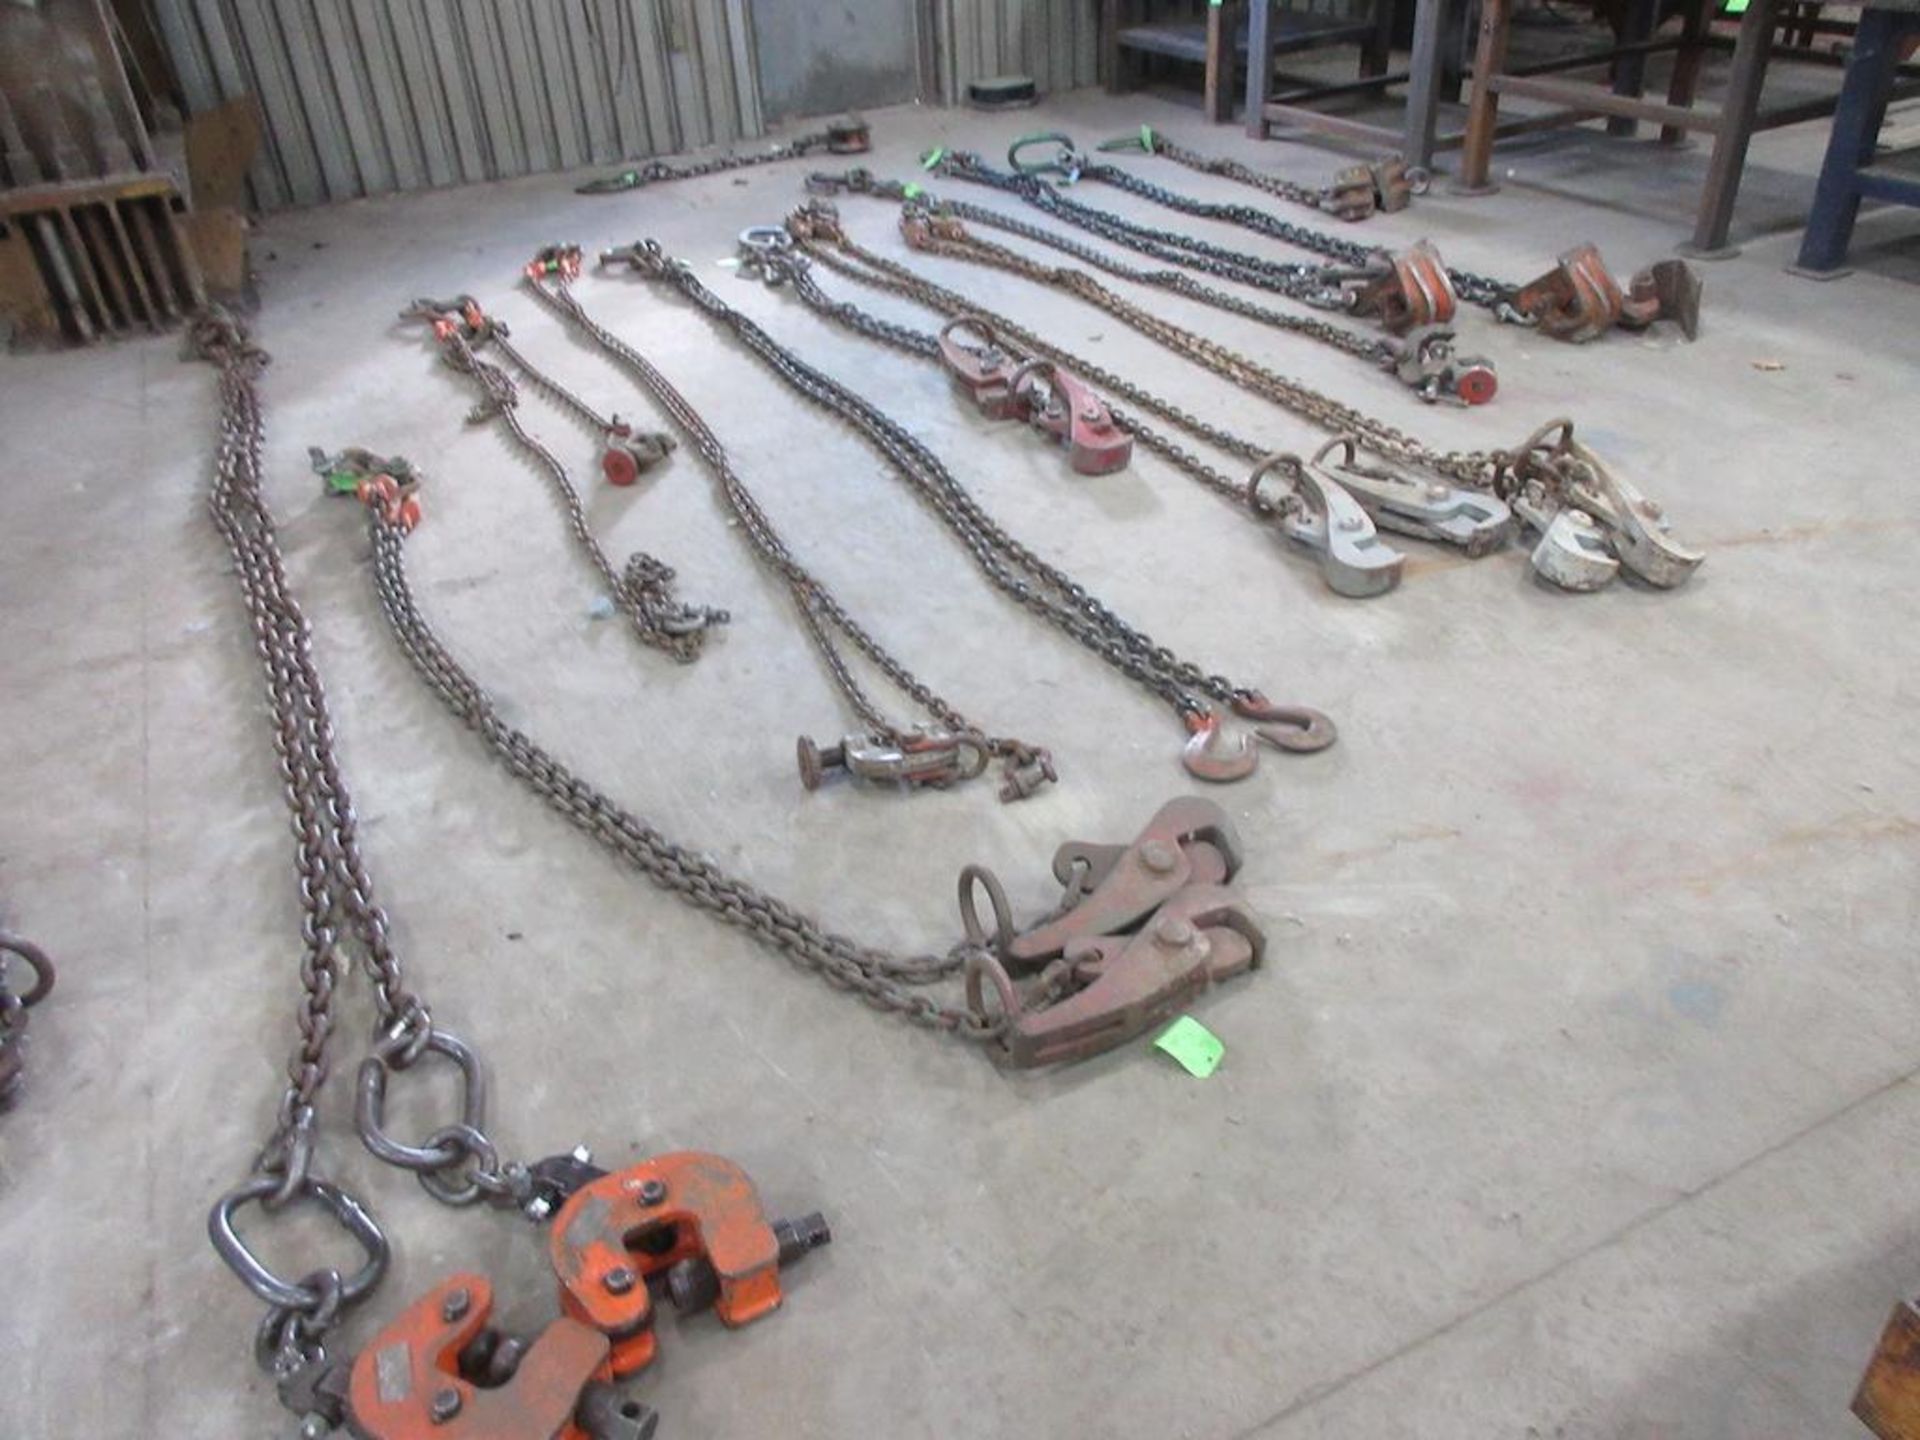 (13) ASSORTED SETS OF HEAVY DUTY LIFTING CHAINS UP TO 6 TON PLATE GRABS - Image 2 of 2